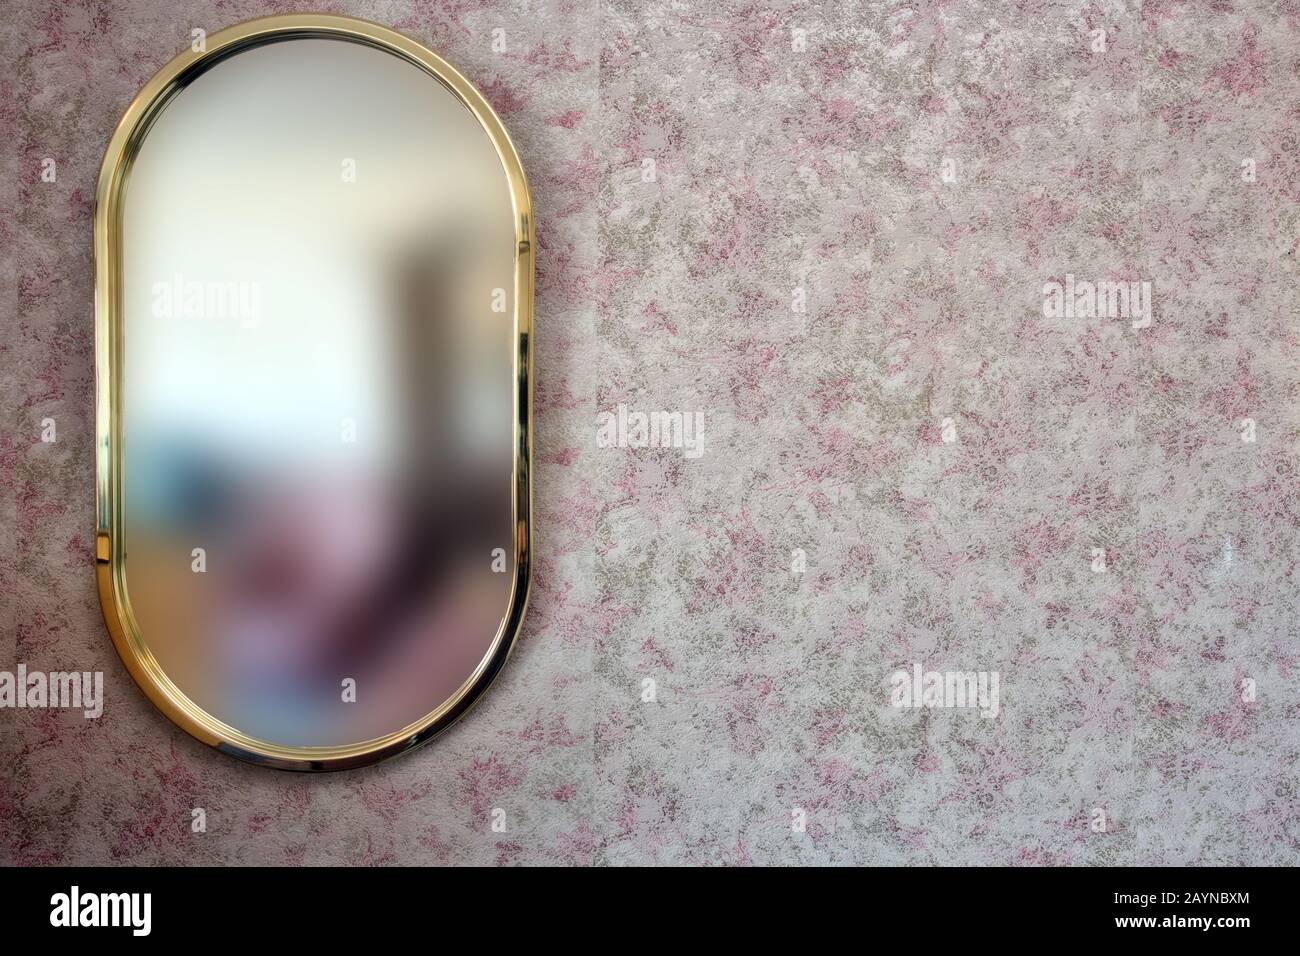 Gold mirror with vintage patterned wallpaper background, space for text Stock Photo